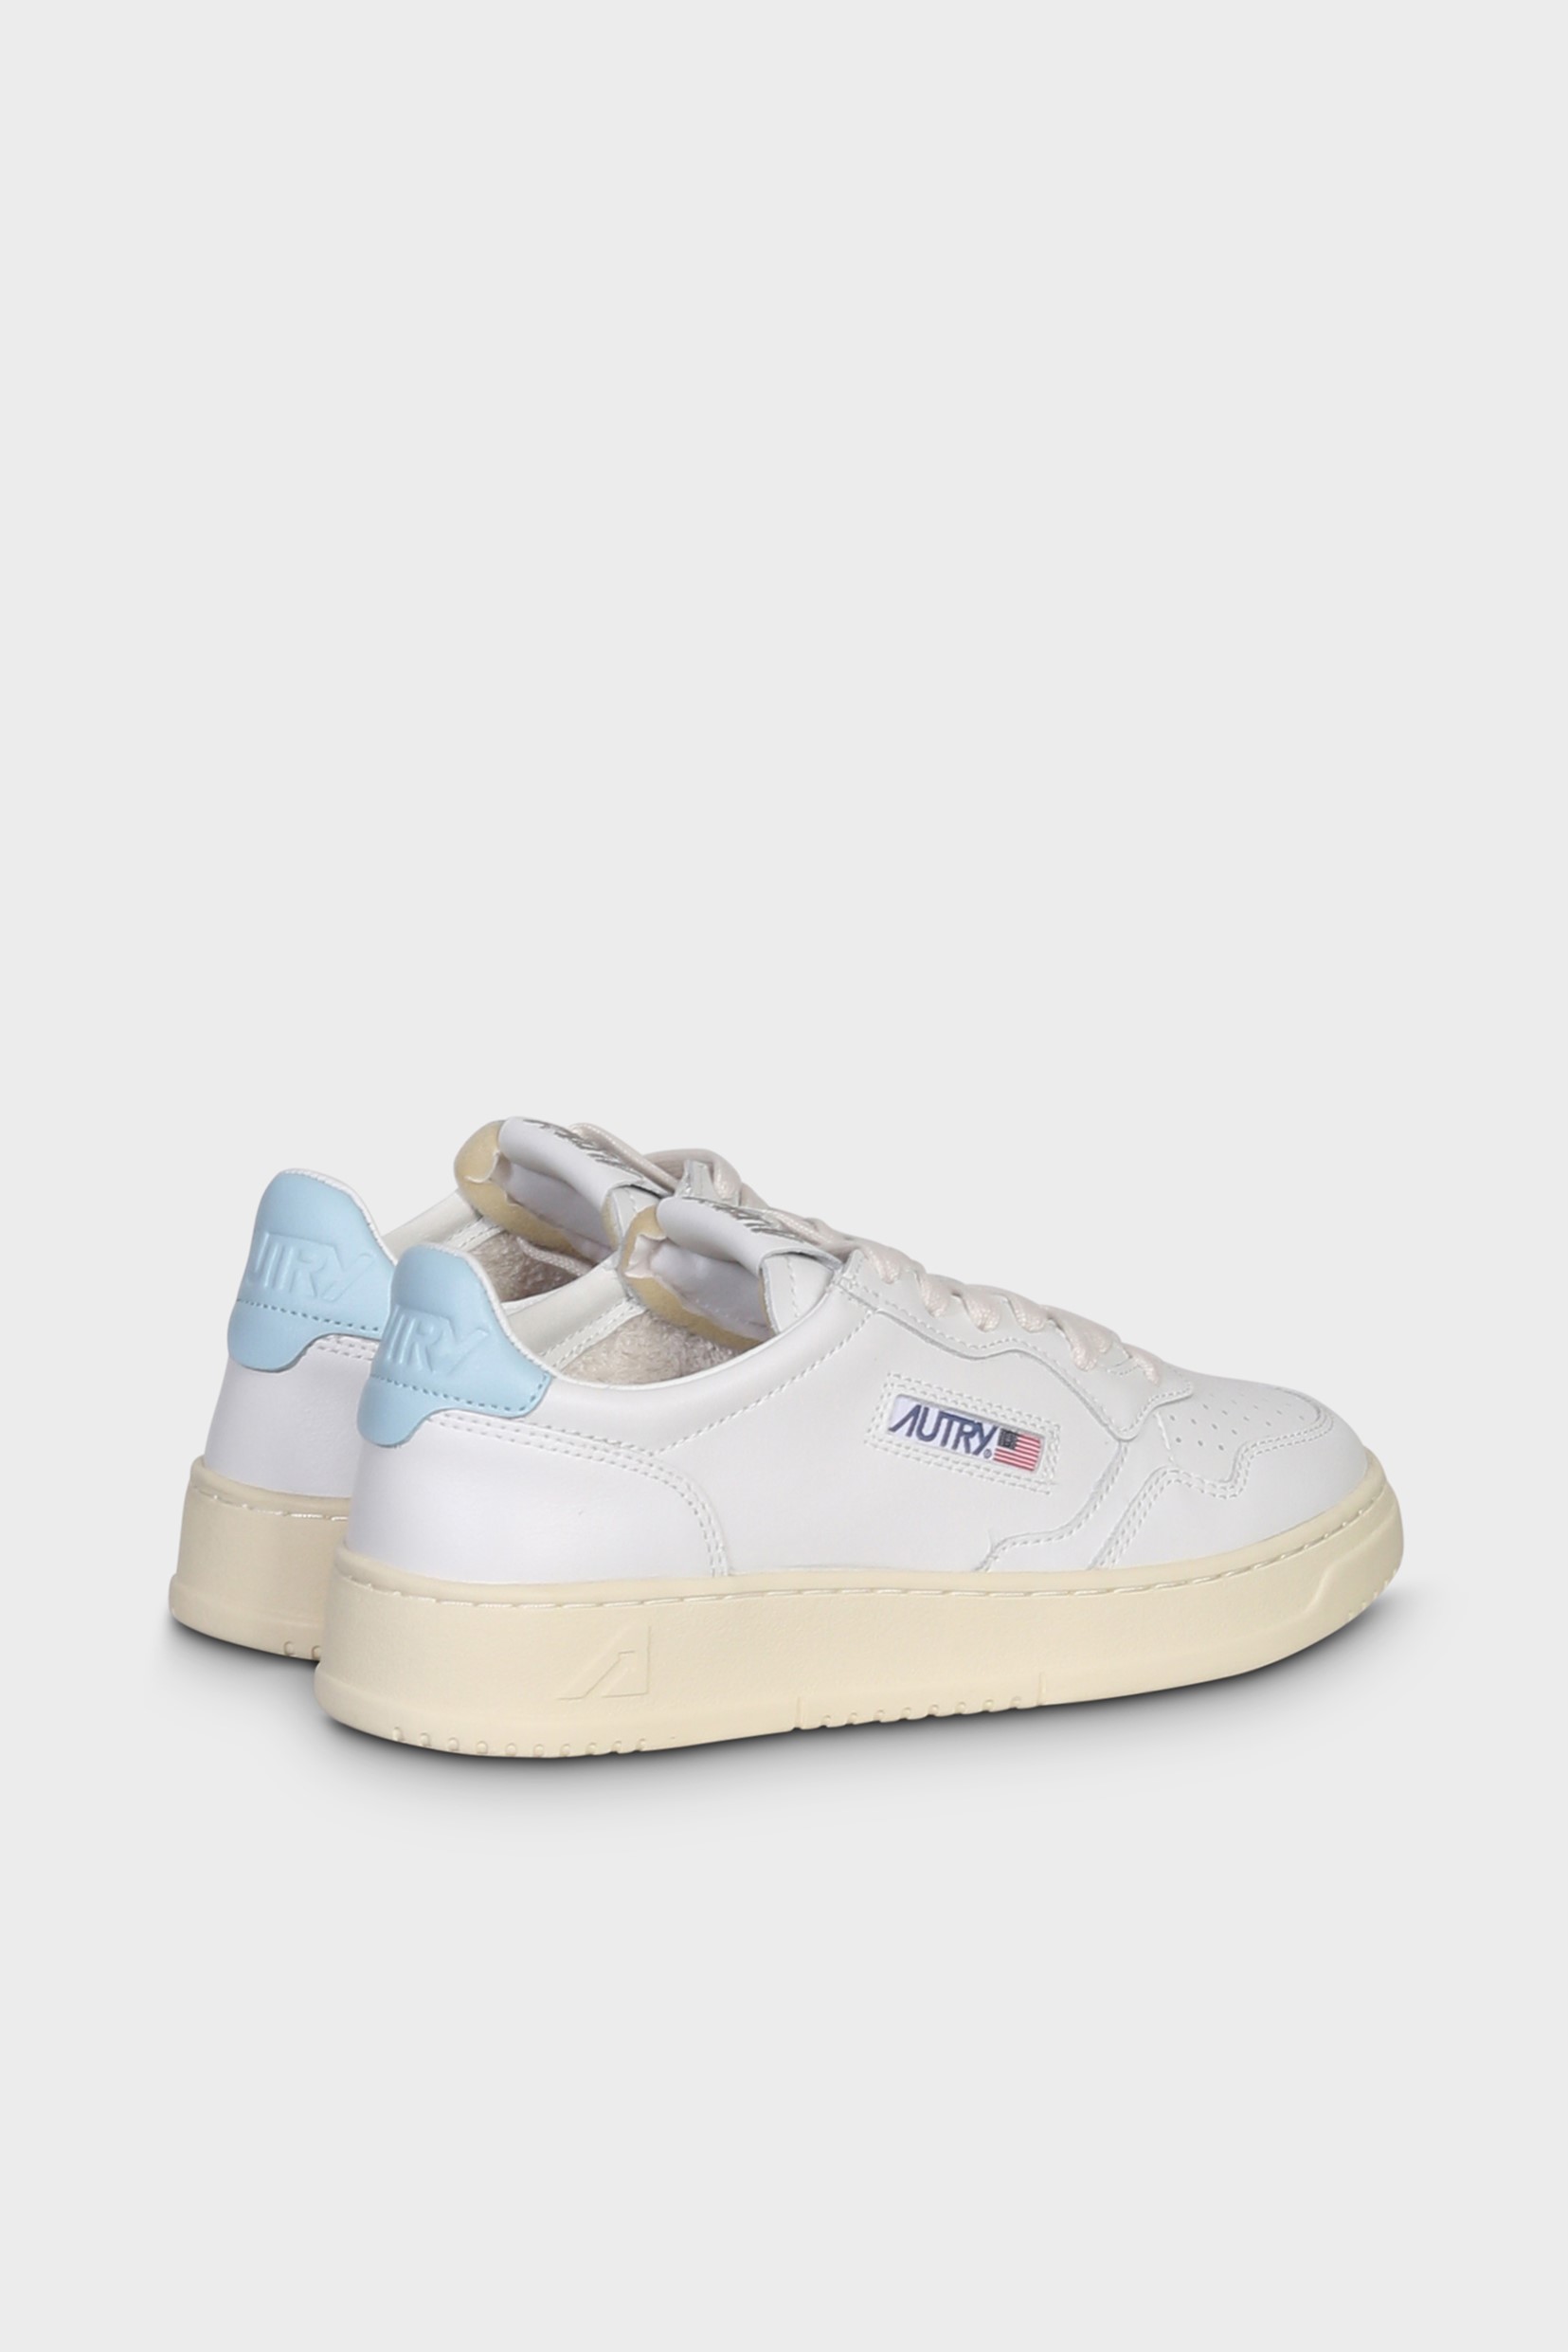 AUTRY ACTION SHOES Medalist Low Sneaker in White/Stream Blue 35